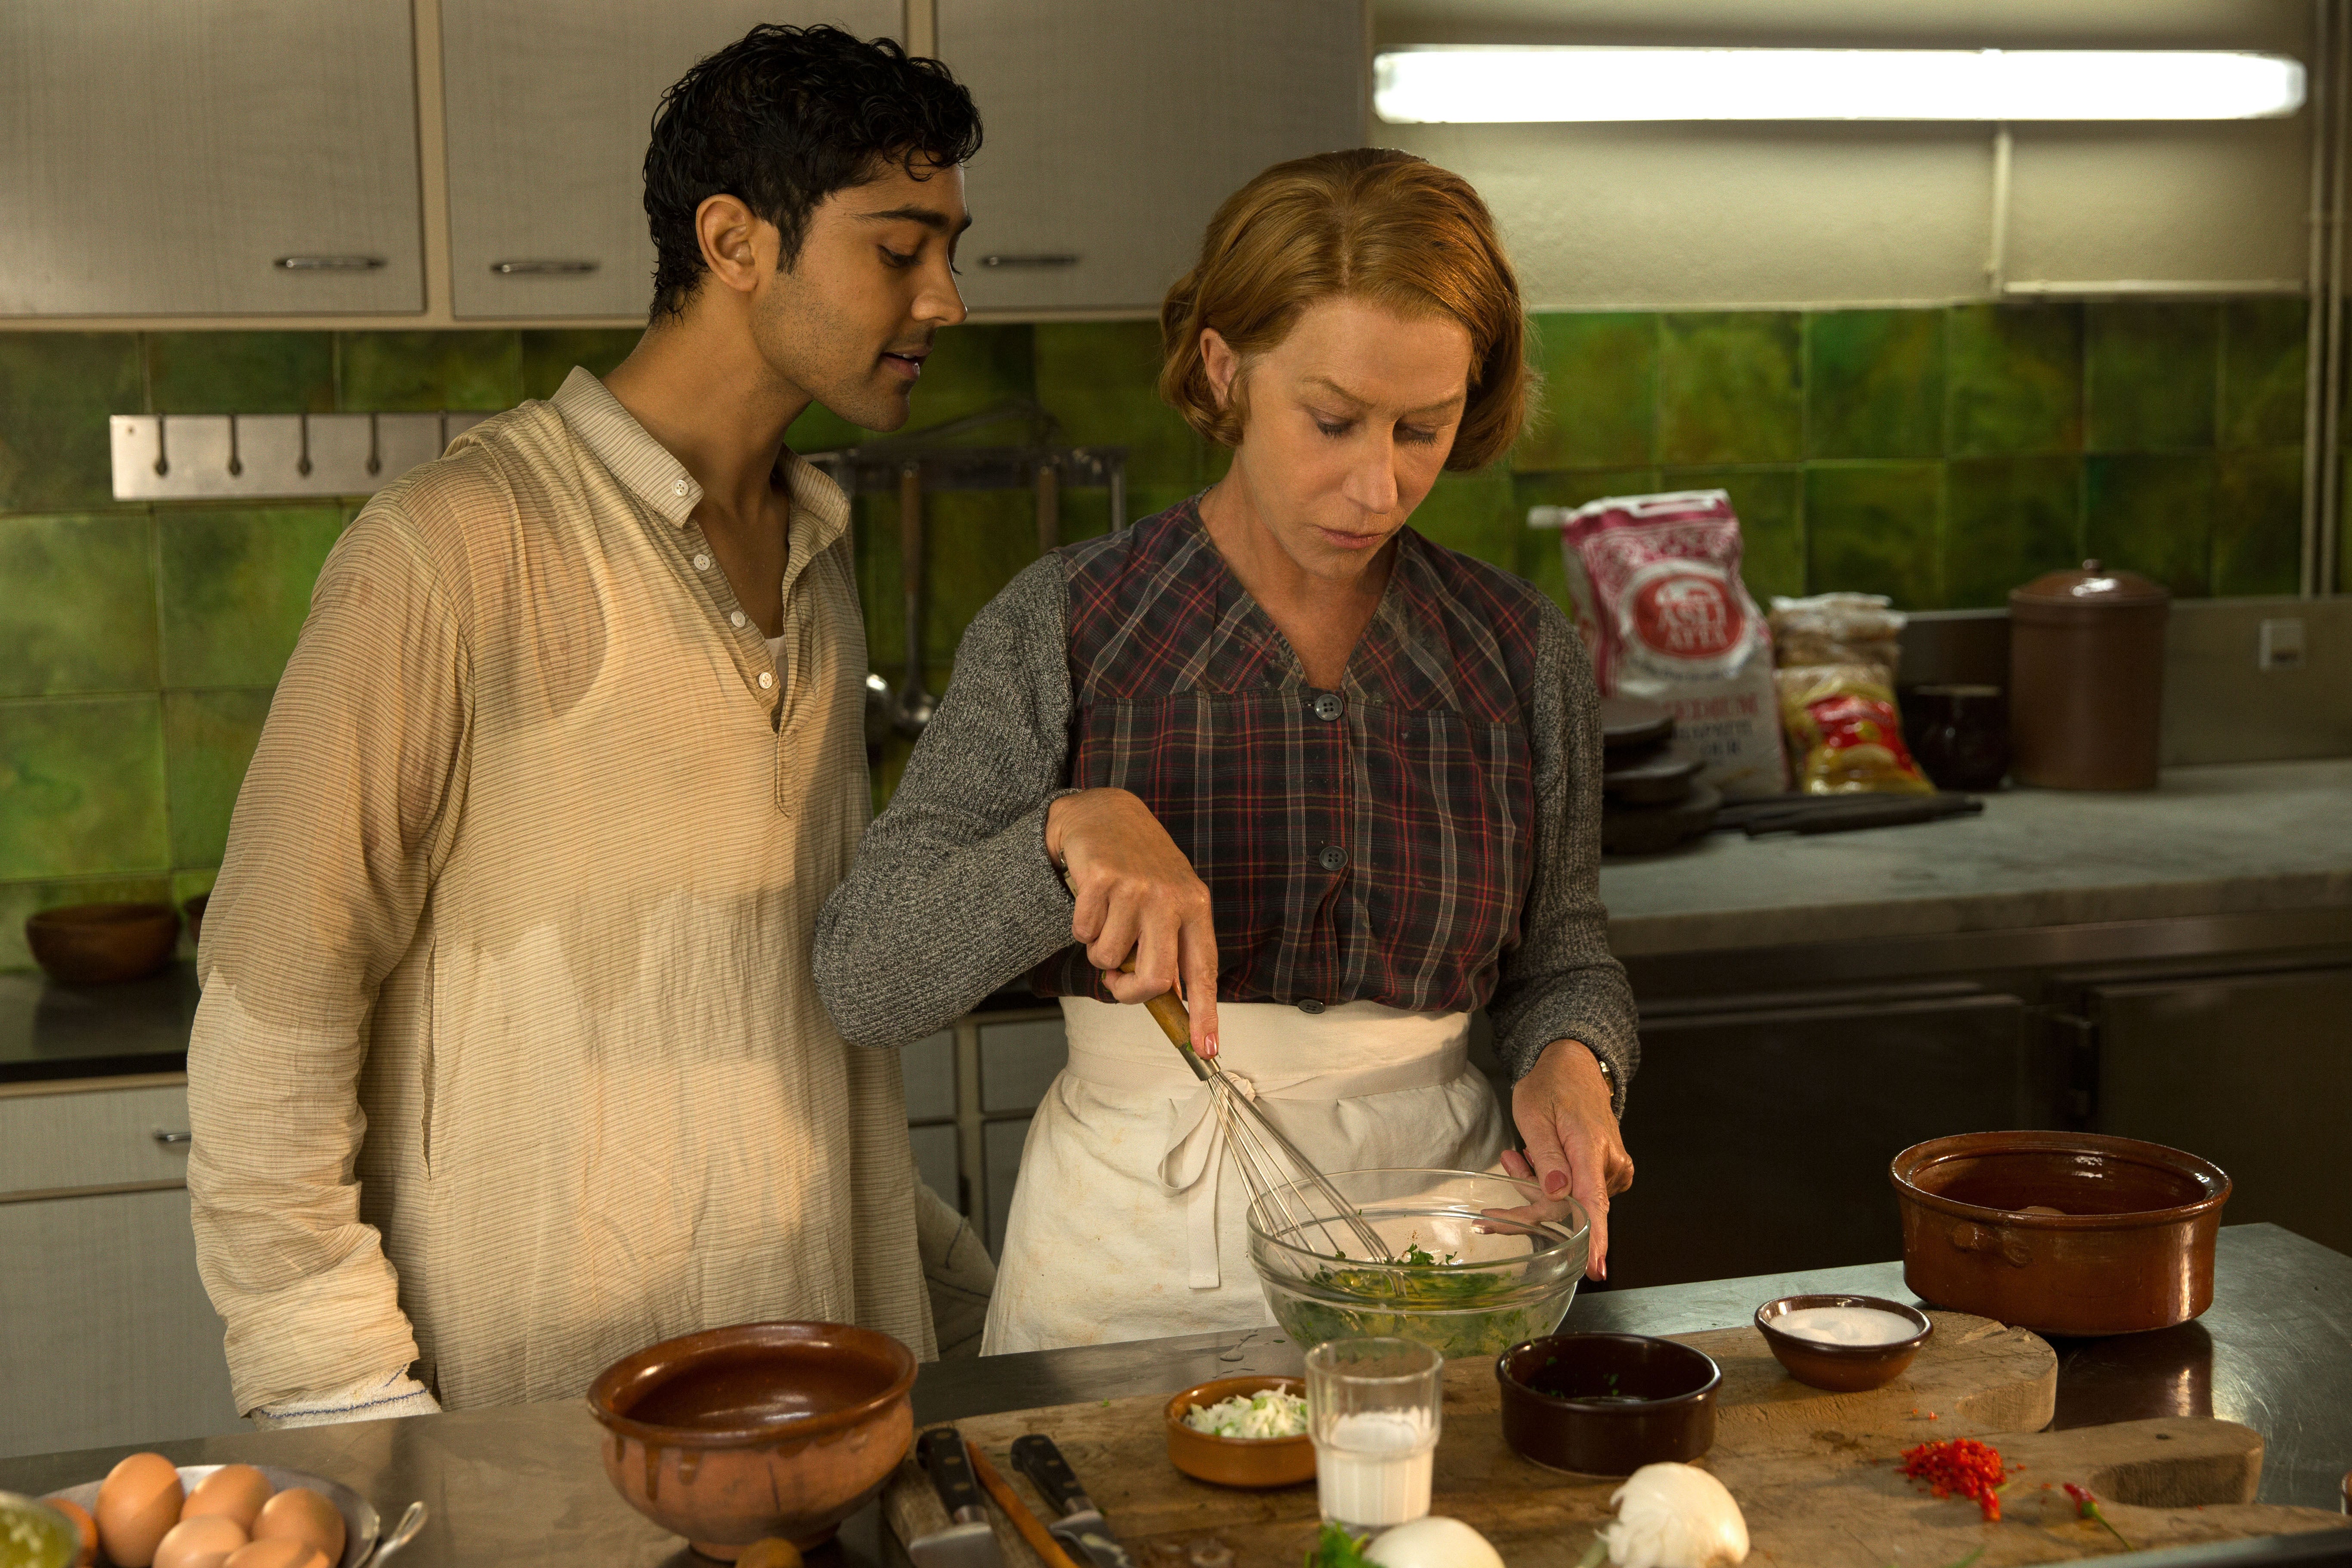 Manish Dayal (left) as Hassan Haji and Helen Mirren as Madame Mallory in The Hundred-Foot Journey (2014)